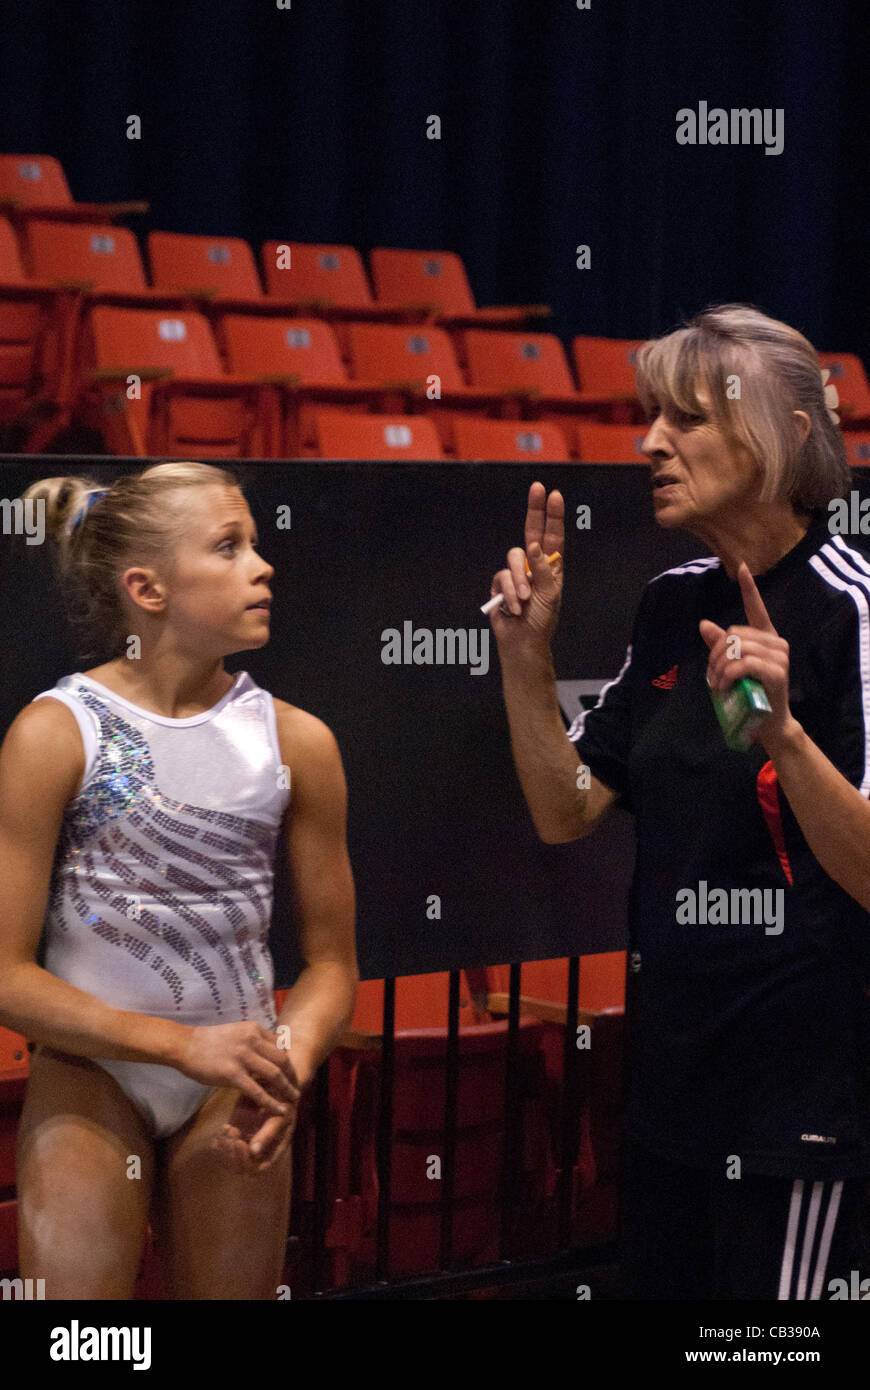 McKenzie Wofford gets tips from her coach during practice at the UIC  Pavillion in Chicago the day before their competition taking place May  26th. Some of the women will find a place